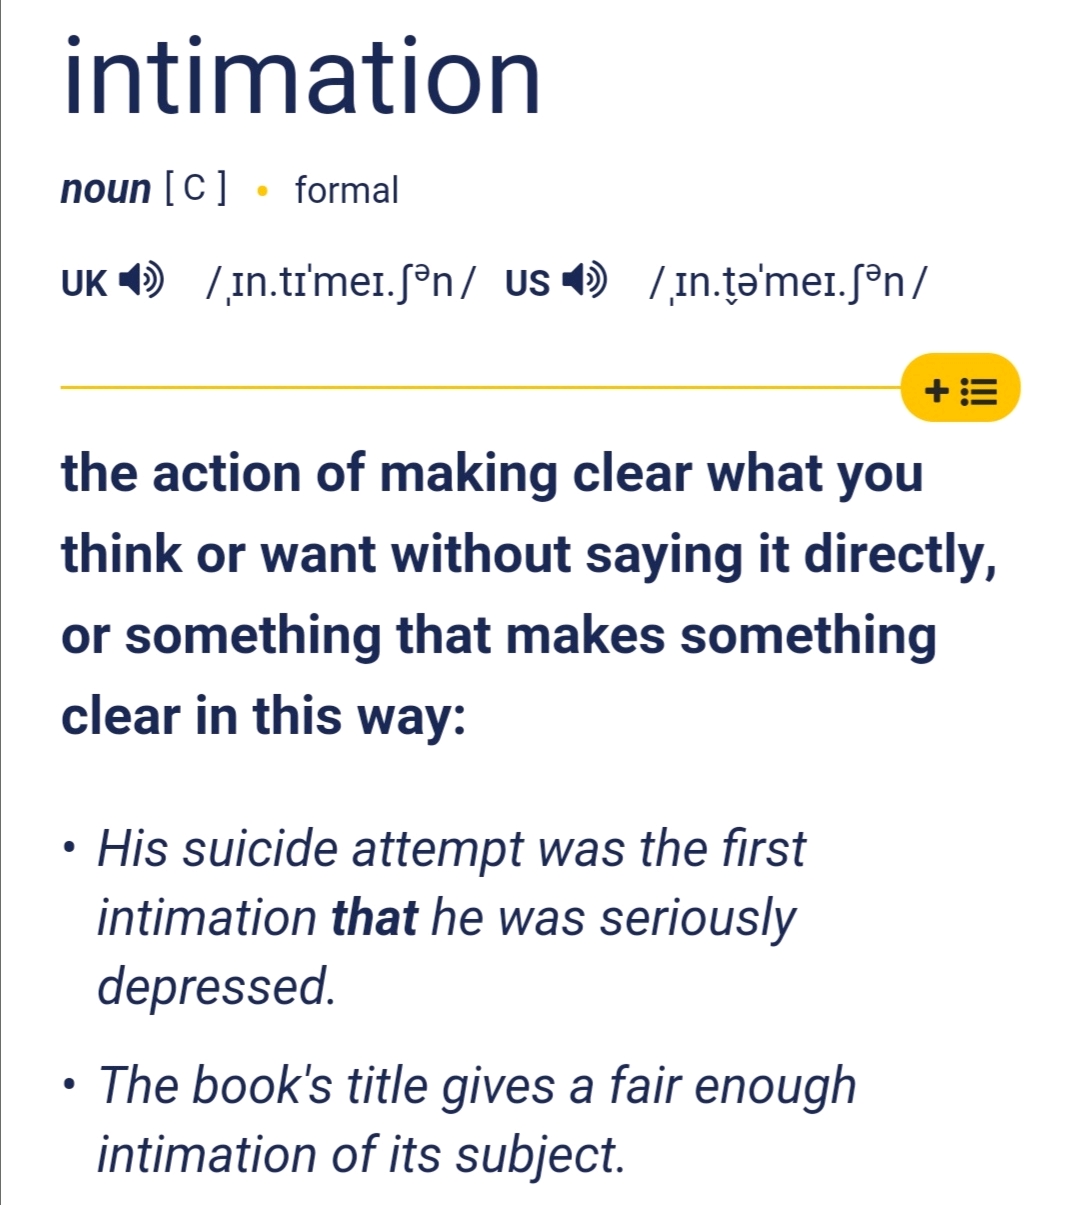 an intimation is an indirect suggestion or sign that something